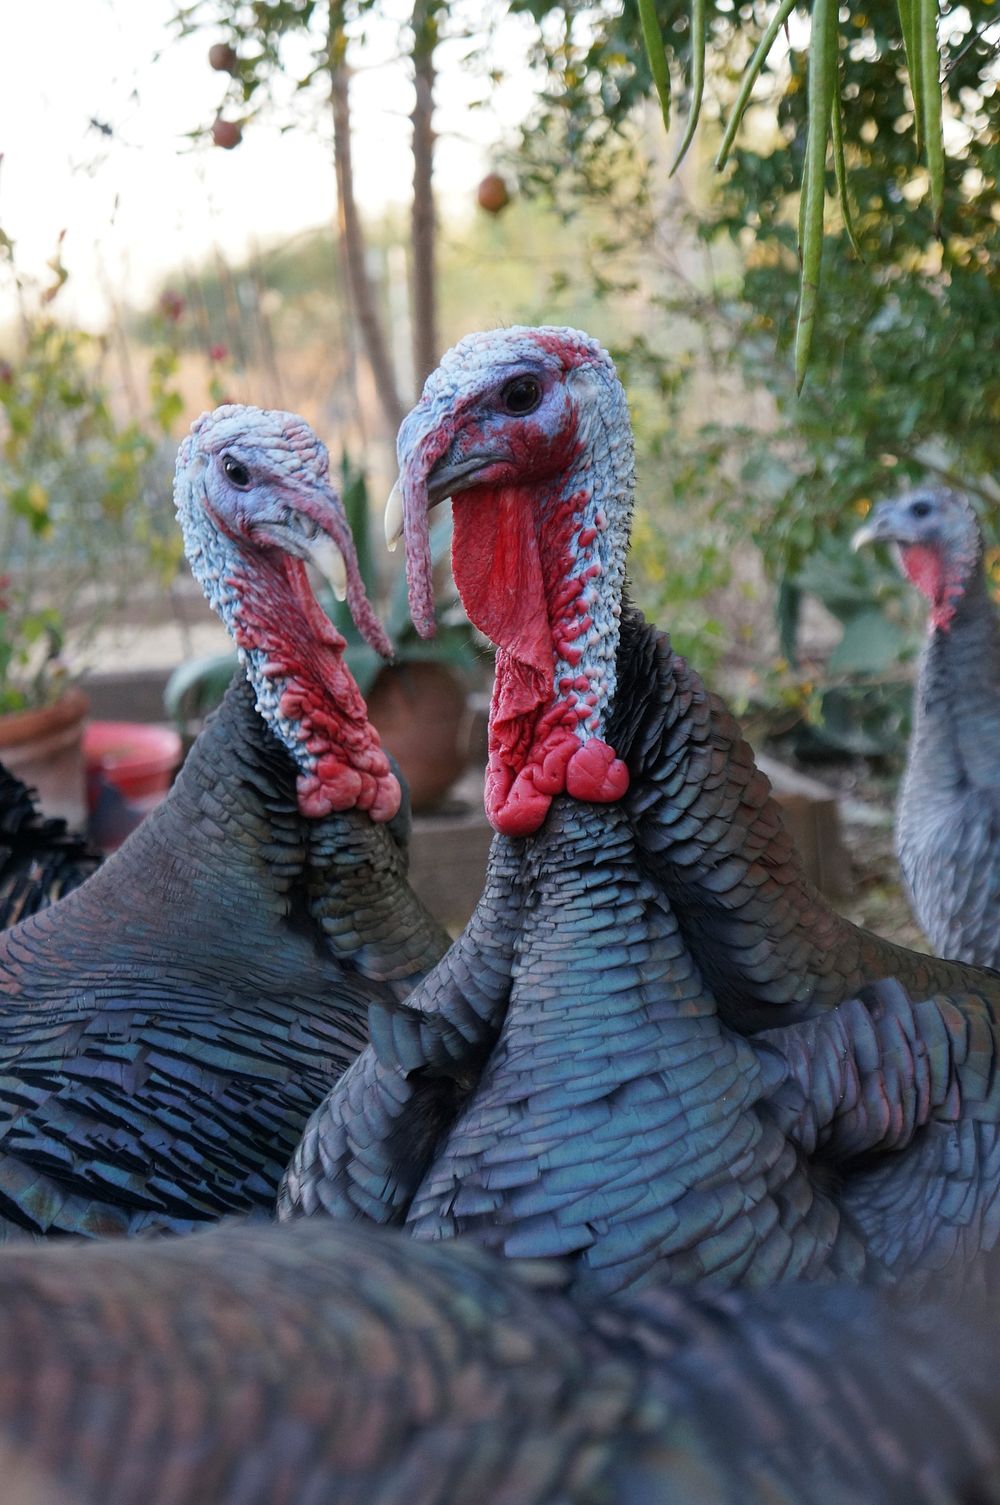 Herd of turkeys in the forest. Original public domain image from Wikimedia Commons